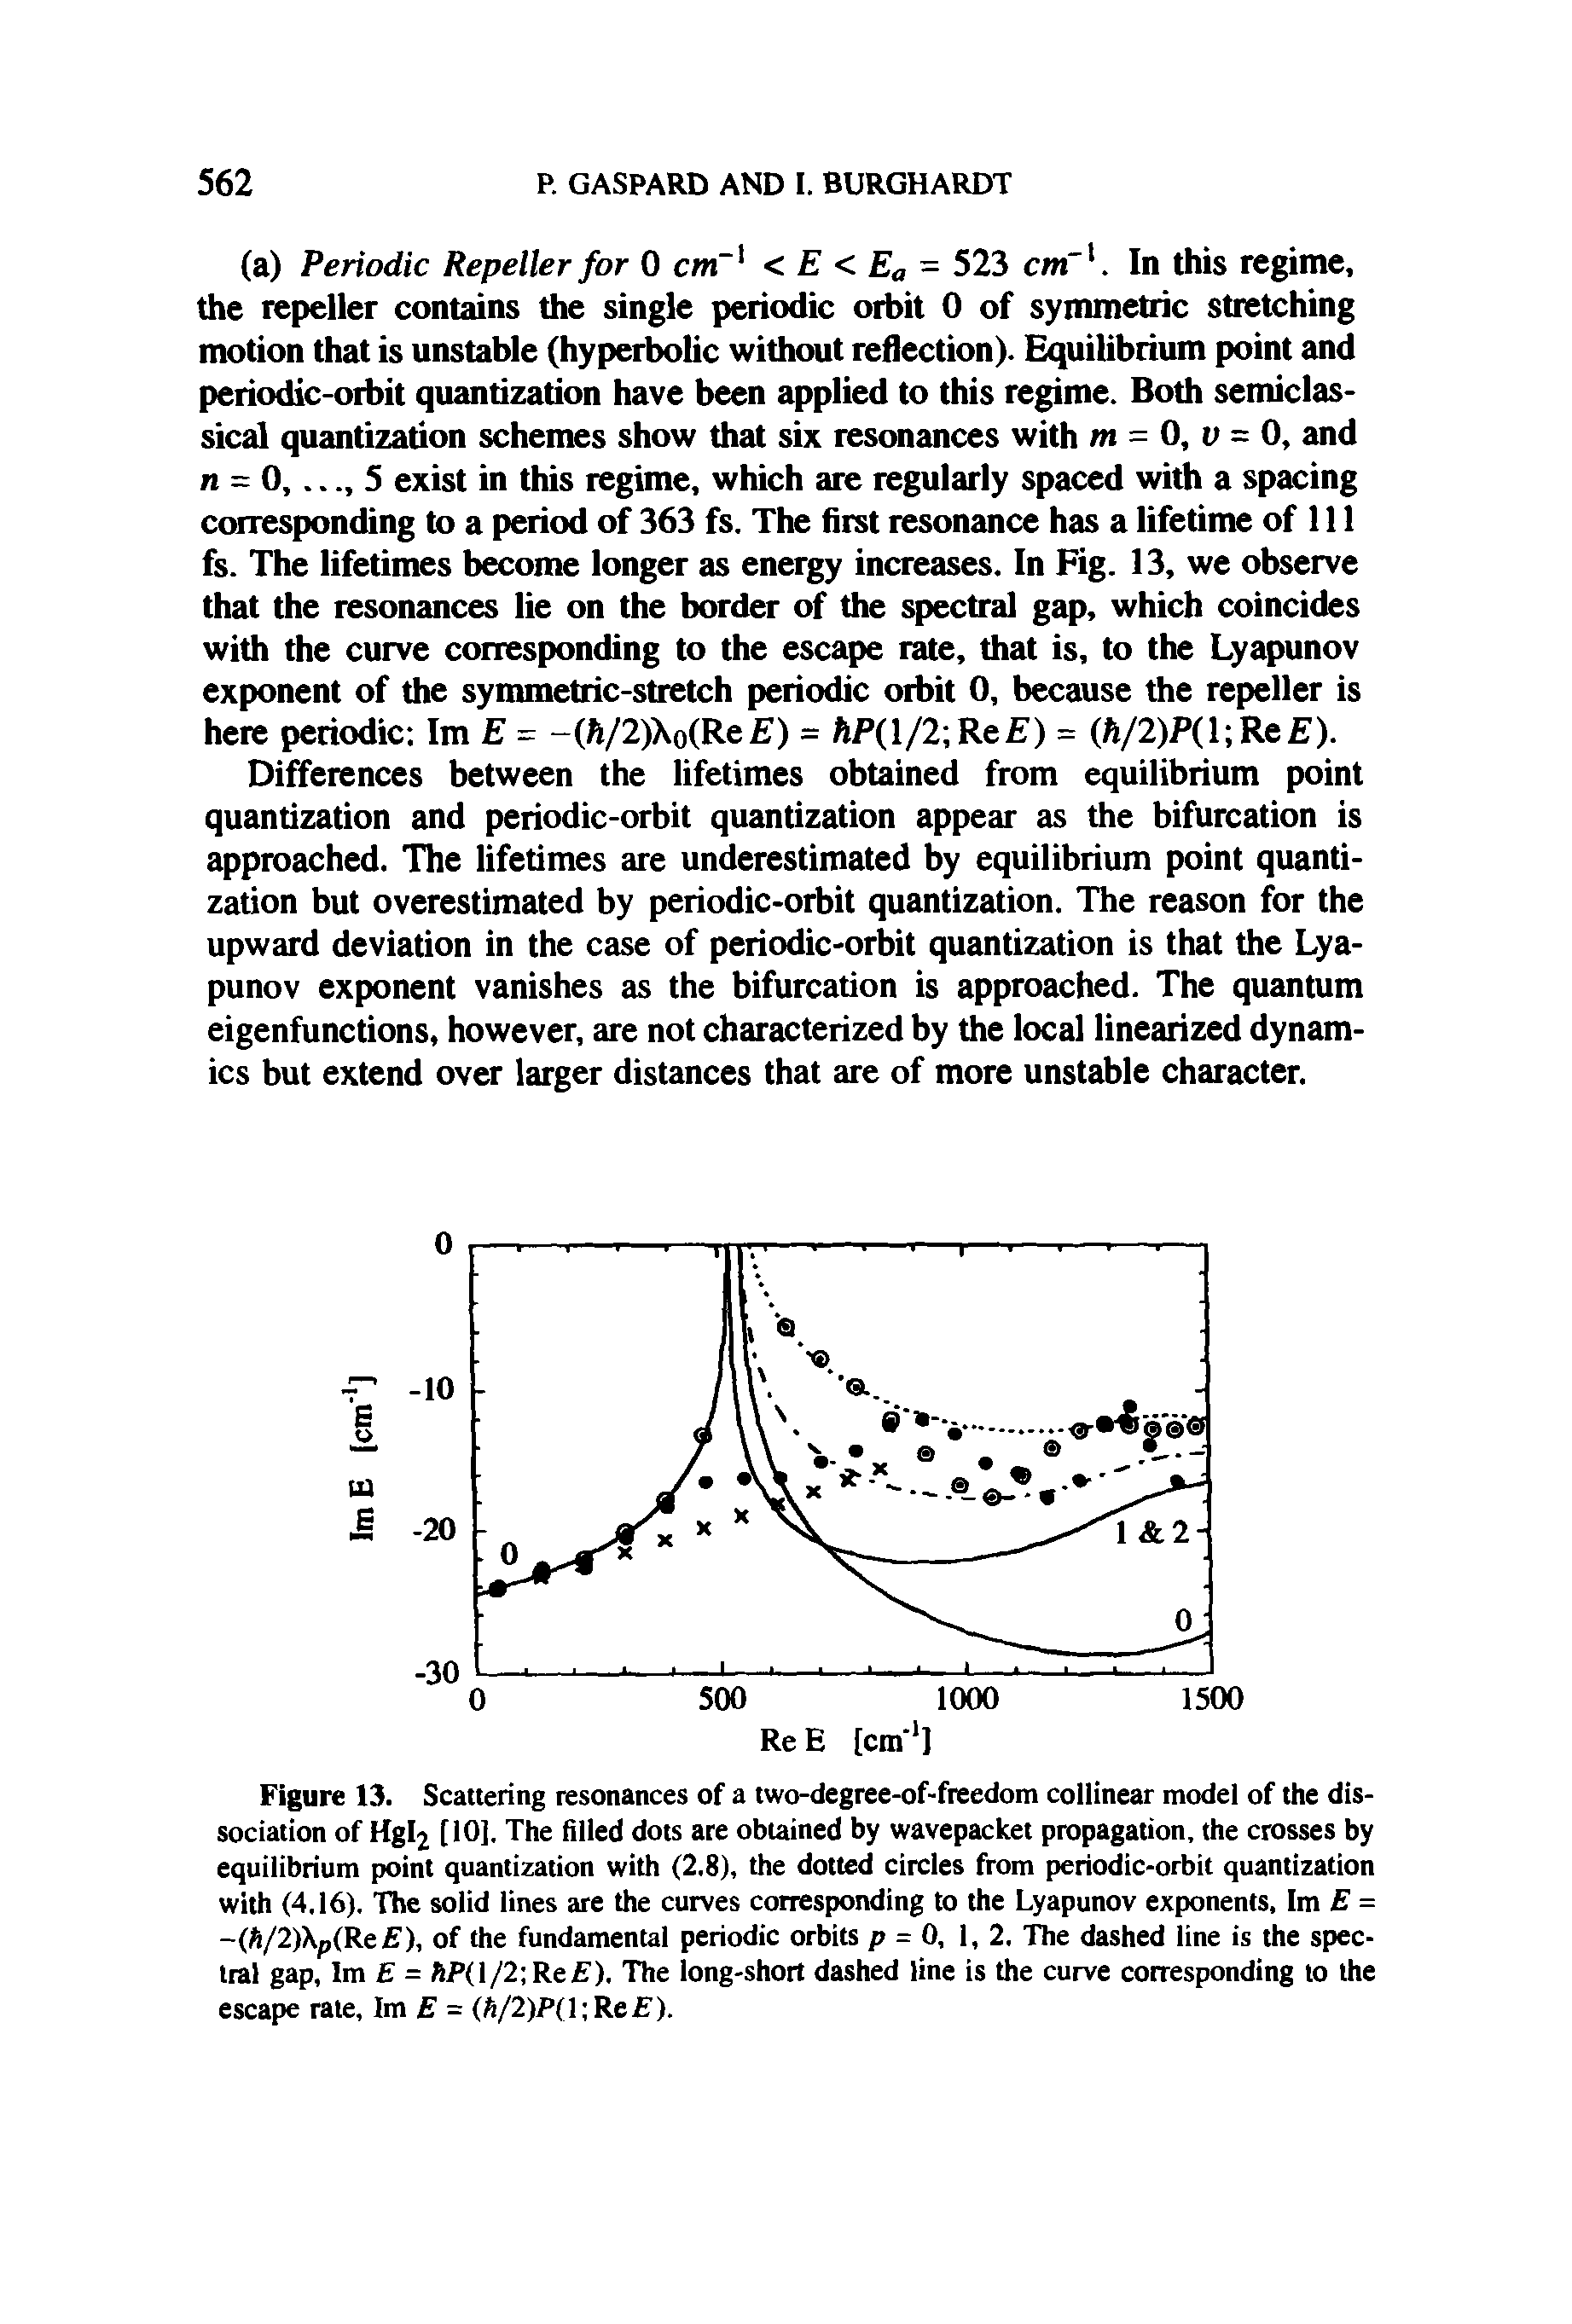 Figure 13. Scattering resonances of a two-degree-of-freedom collinear model of the dissociation of Hgl2 [10], The filled dots are obtained by wavepacket propagation, the crosses by equilibrium point quantization with (2.8), the dotted circles from periodic-orbit quantization with (4.16). The solid lines are the curves corresponding to the Lyapunov exponents, Im E = -(A/2)Xp(Re ), of the fundamental periodic orbits p = 0, 1,2. The dashed line is the spectral gap, Im = ftP(l/2 Ref). The long-short dashed line is the curve corresponding to the escape rate, Im E = (h/2)P( Re ).